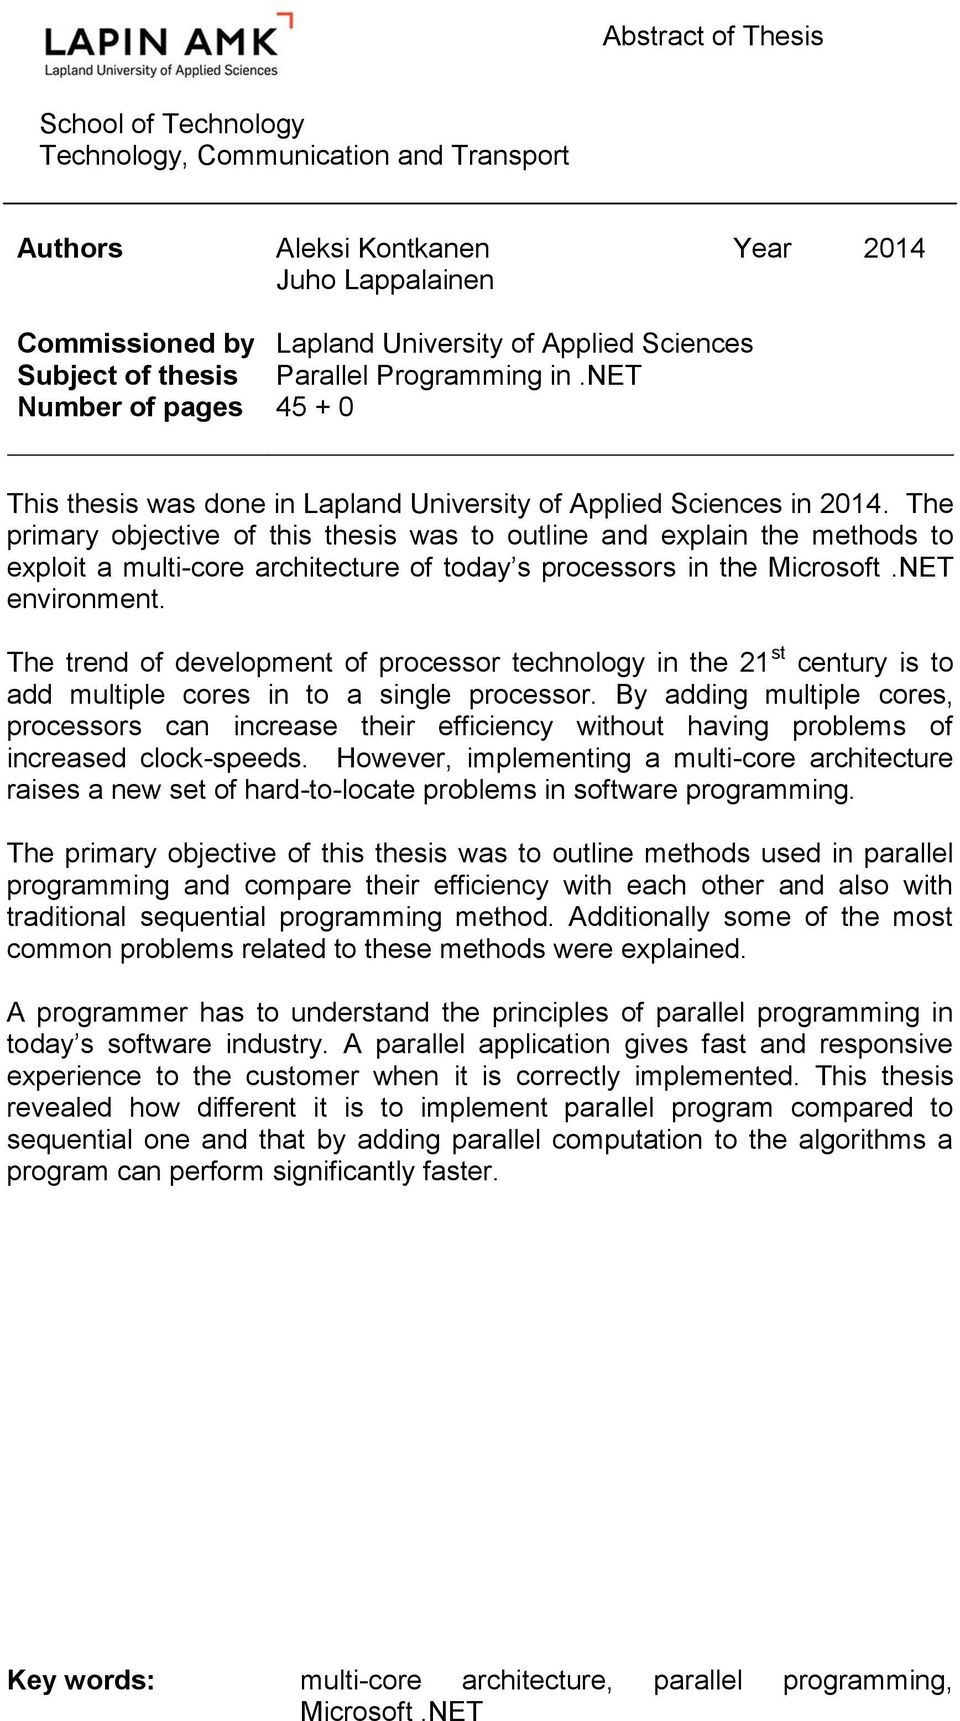 The primary objective of this thesis was to outline and explain the methods to exploit a multi-core architecture of today s processors in the Microsoft.NET environment.